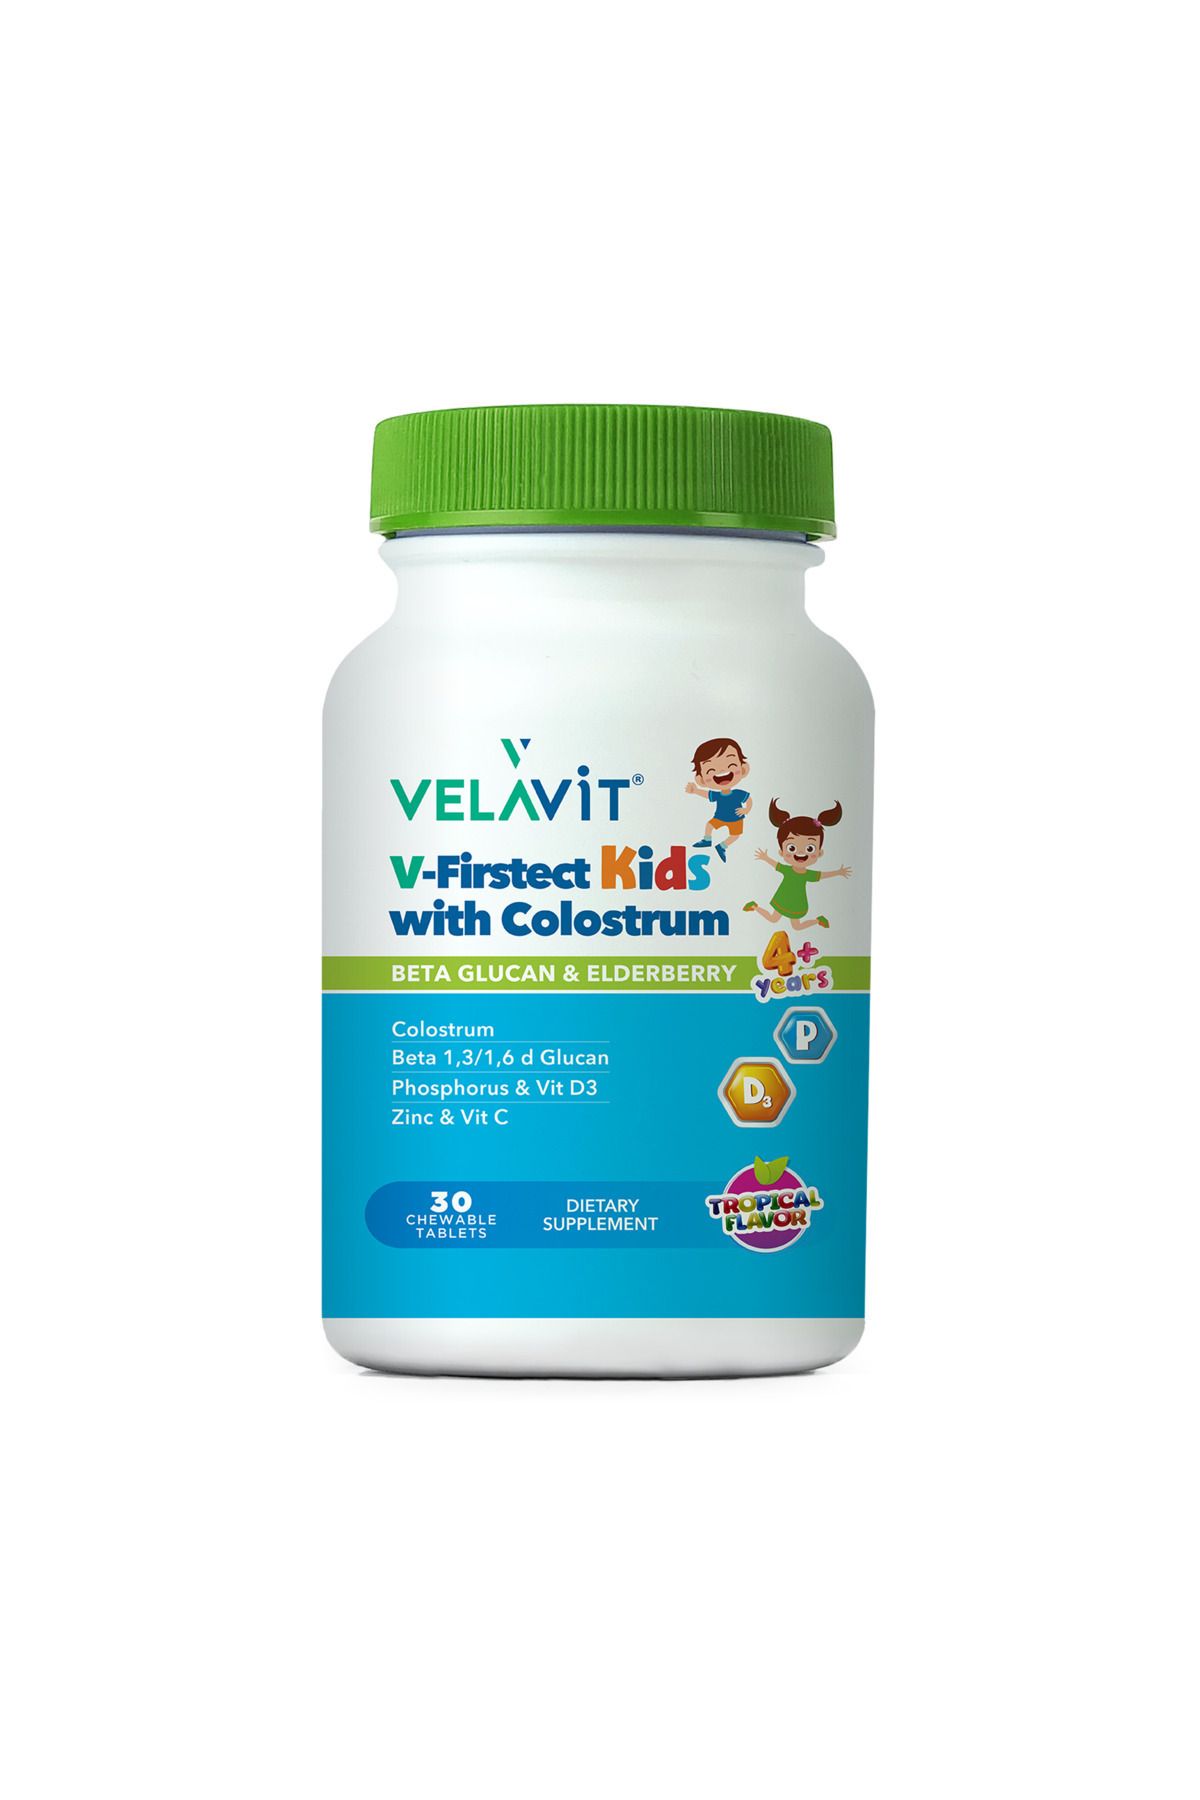 Velavit V-Firstect Kids with Colostrum